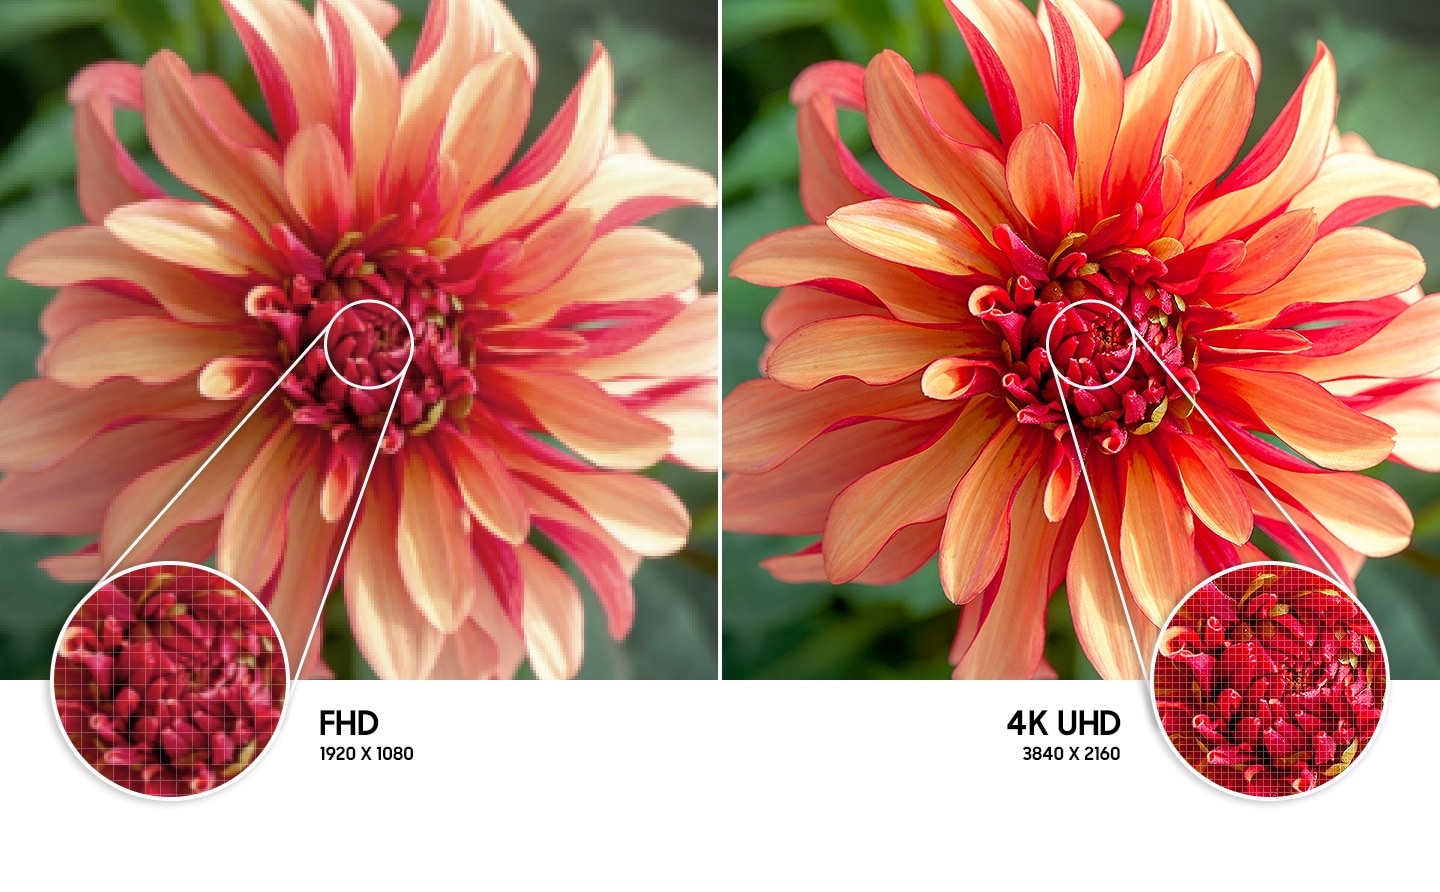 Description: The flower image on the right compared to the left shows higher quality picture resolution created by 4K UHD technology.